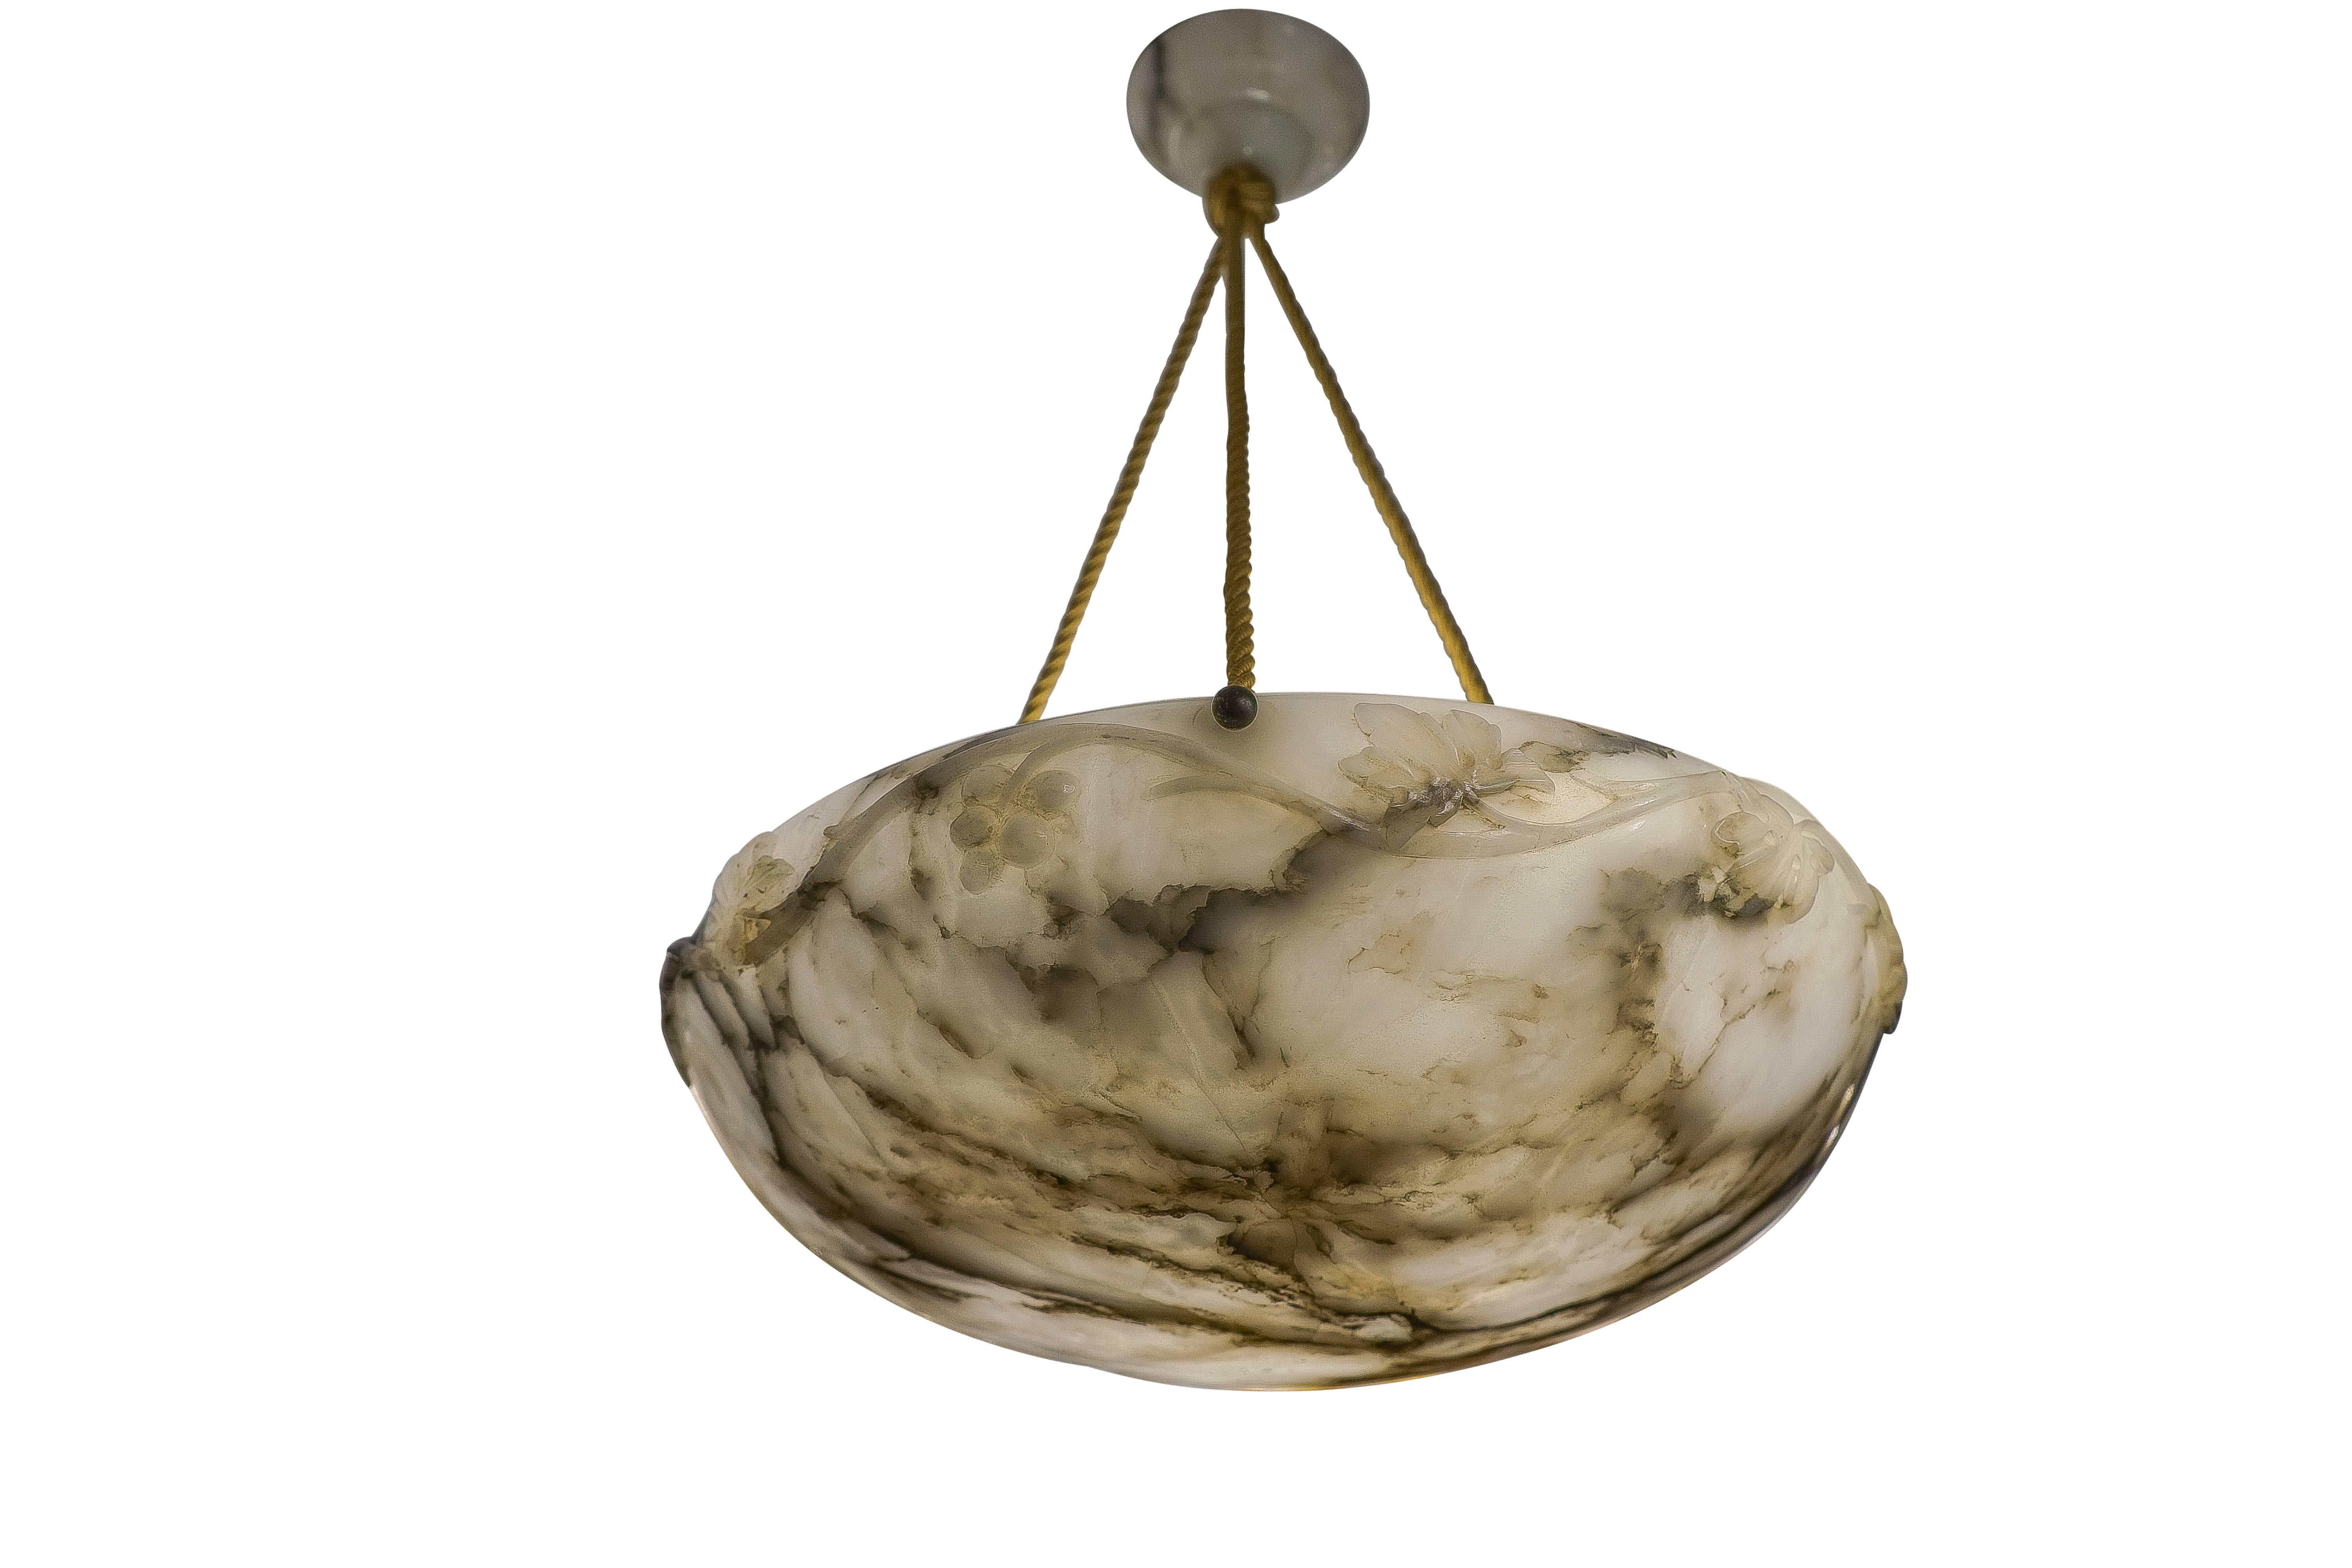 Why not add a little drama? This stunning white alabaster light fixture is entwined with vines, leaves and yes, grapes! The deep, charcoal mineral veining makes this one of our most interesting light fixtures to ponder. Holds three 60 watt